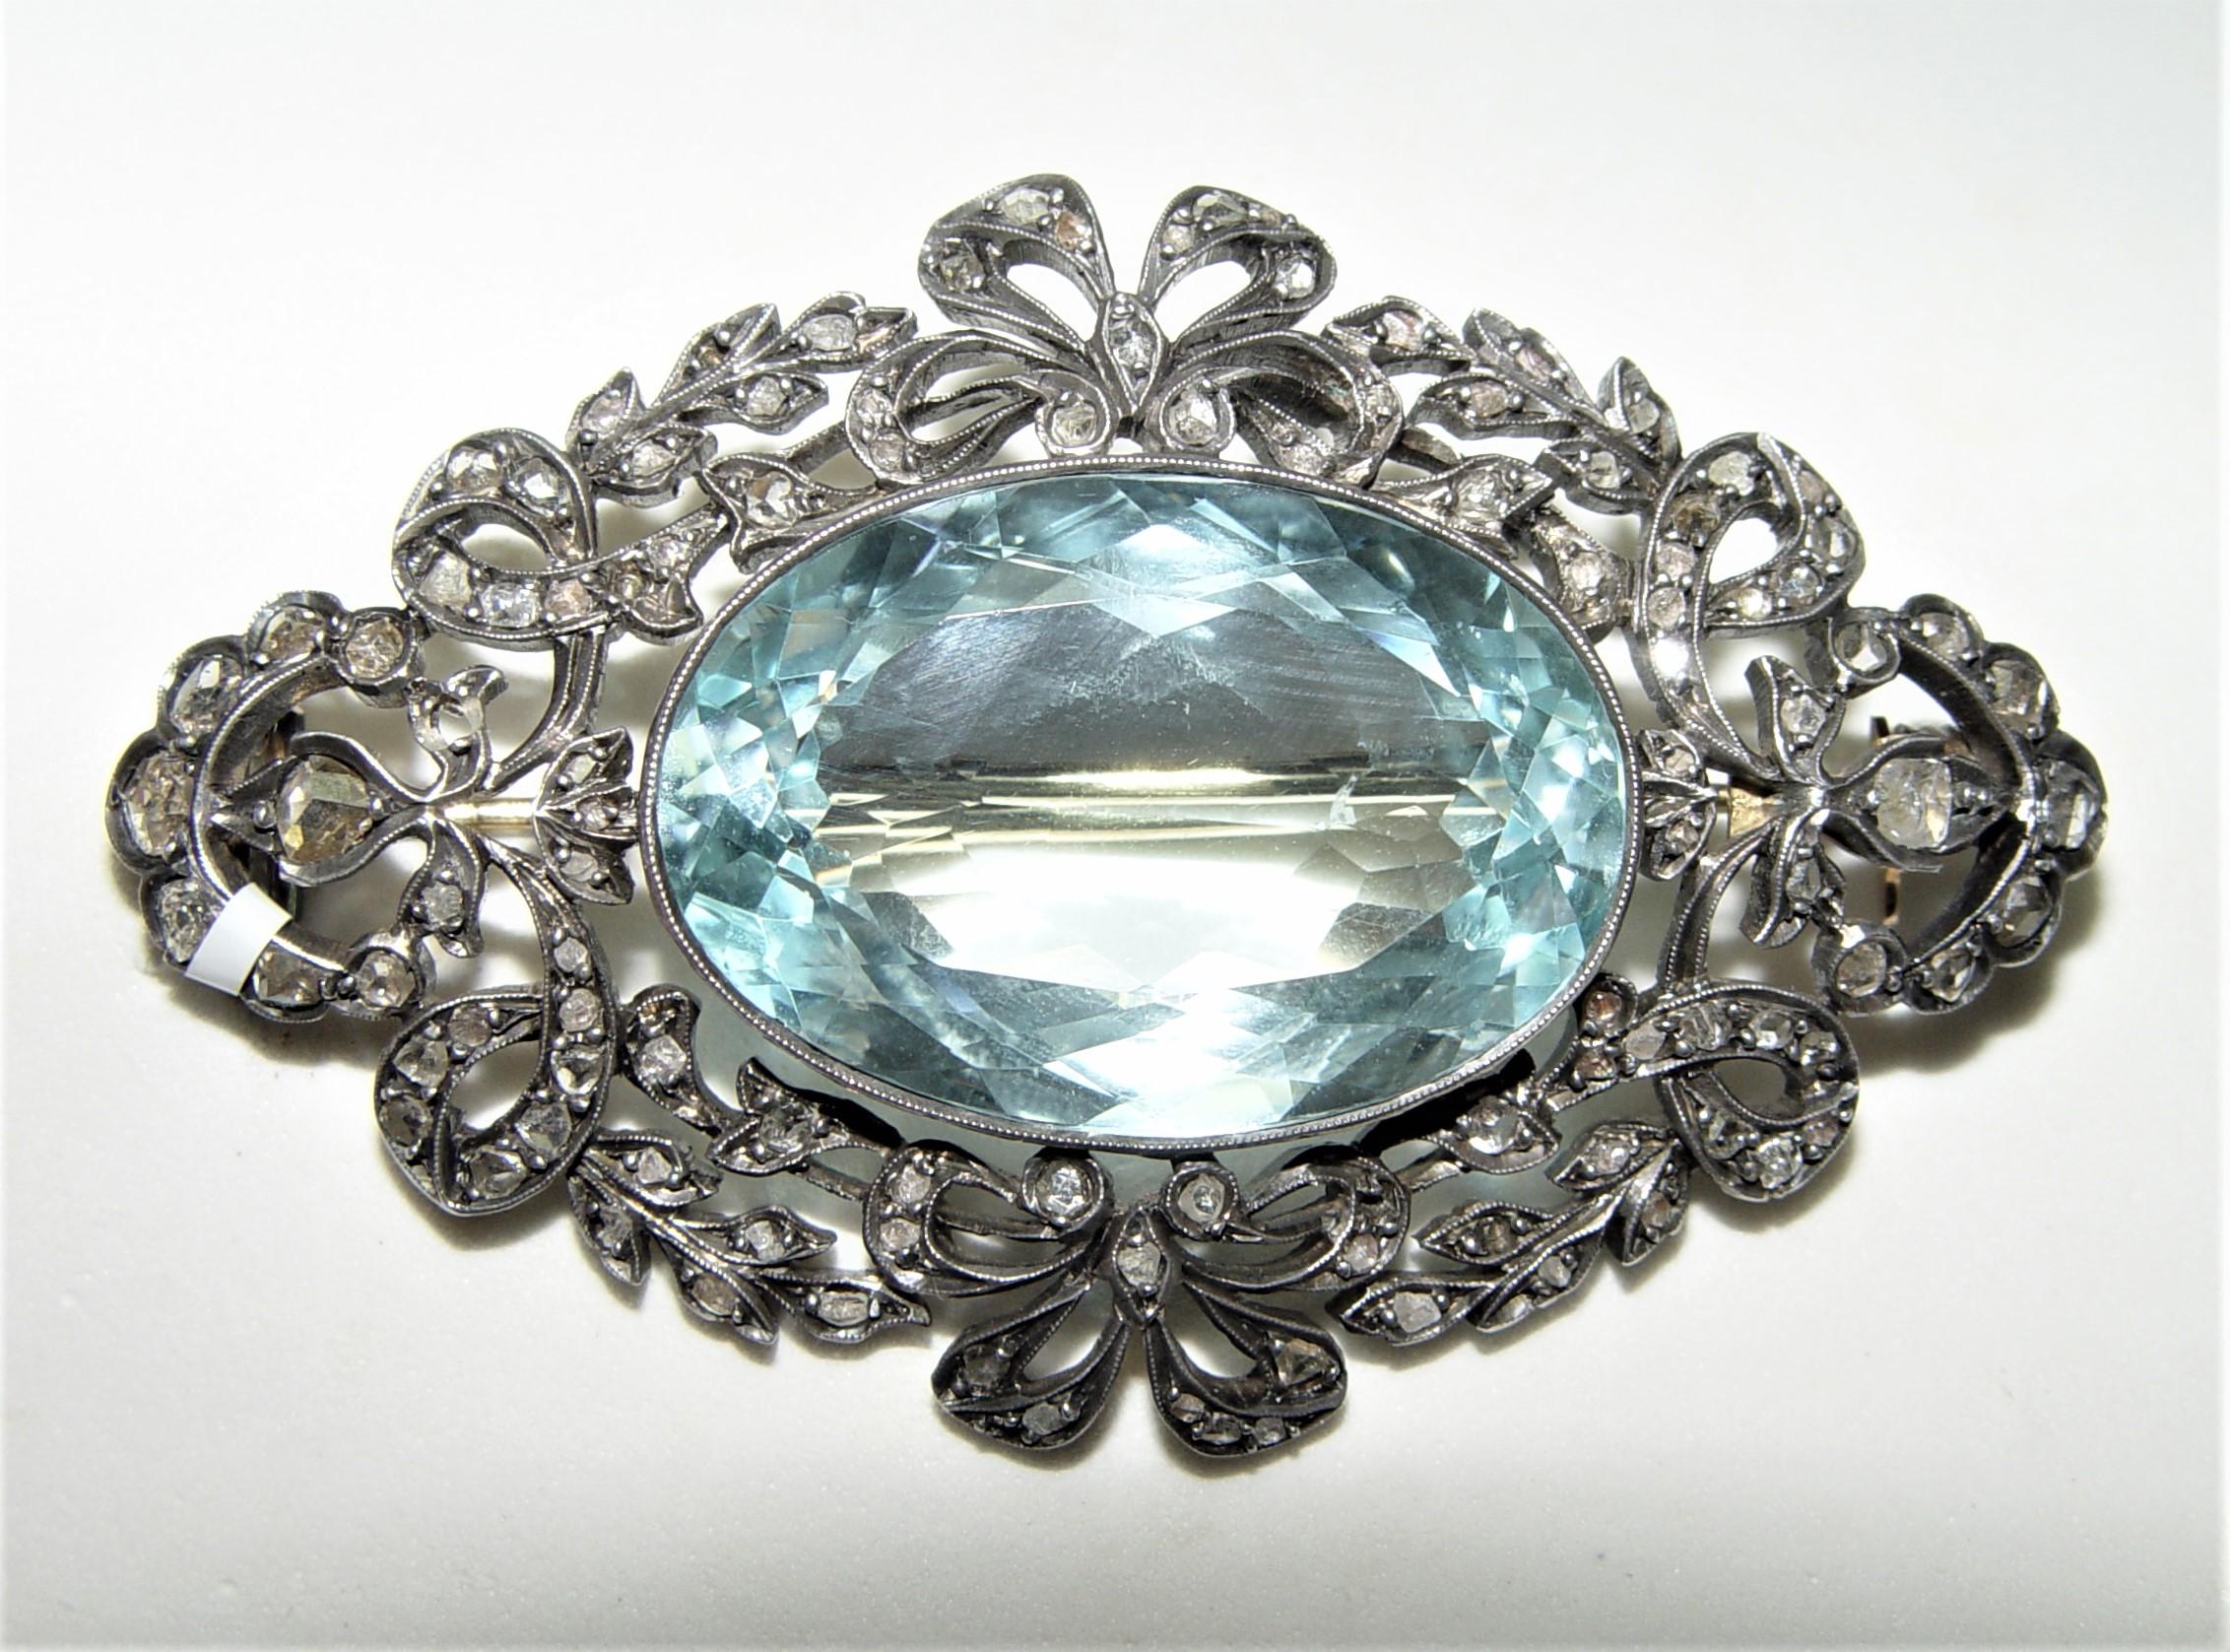 55.00CT Aquamarine Brooch Silver over Gold C. Dunaigre Lab. In Good Condition For Sale In Chicago, IL